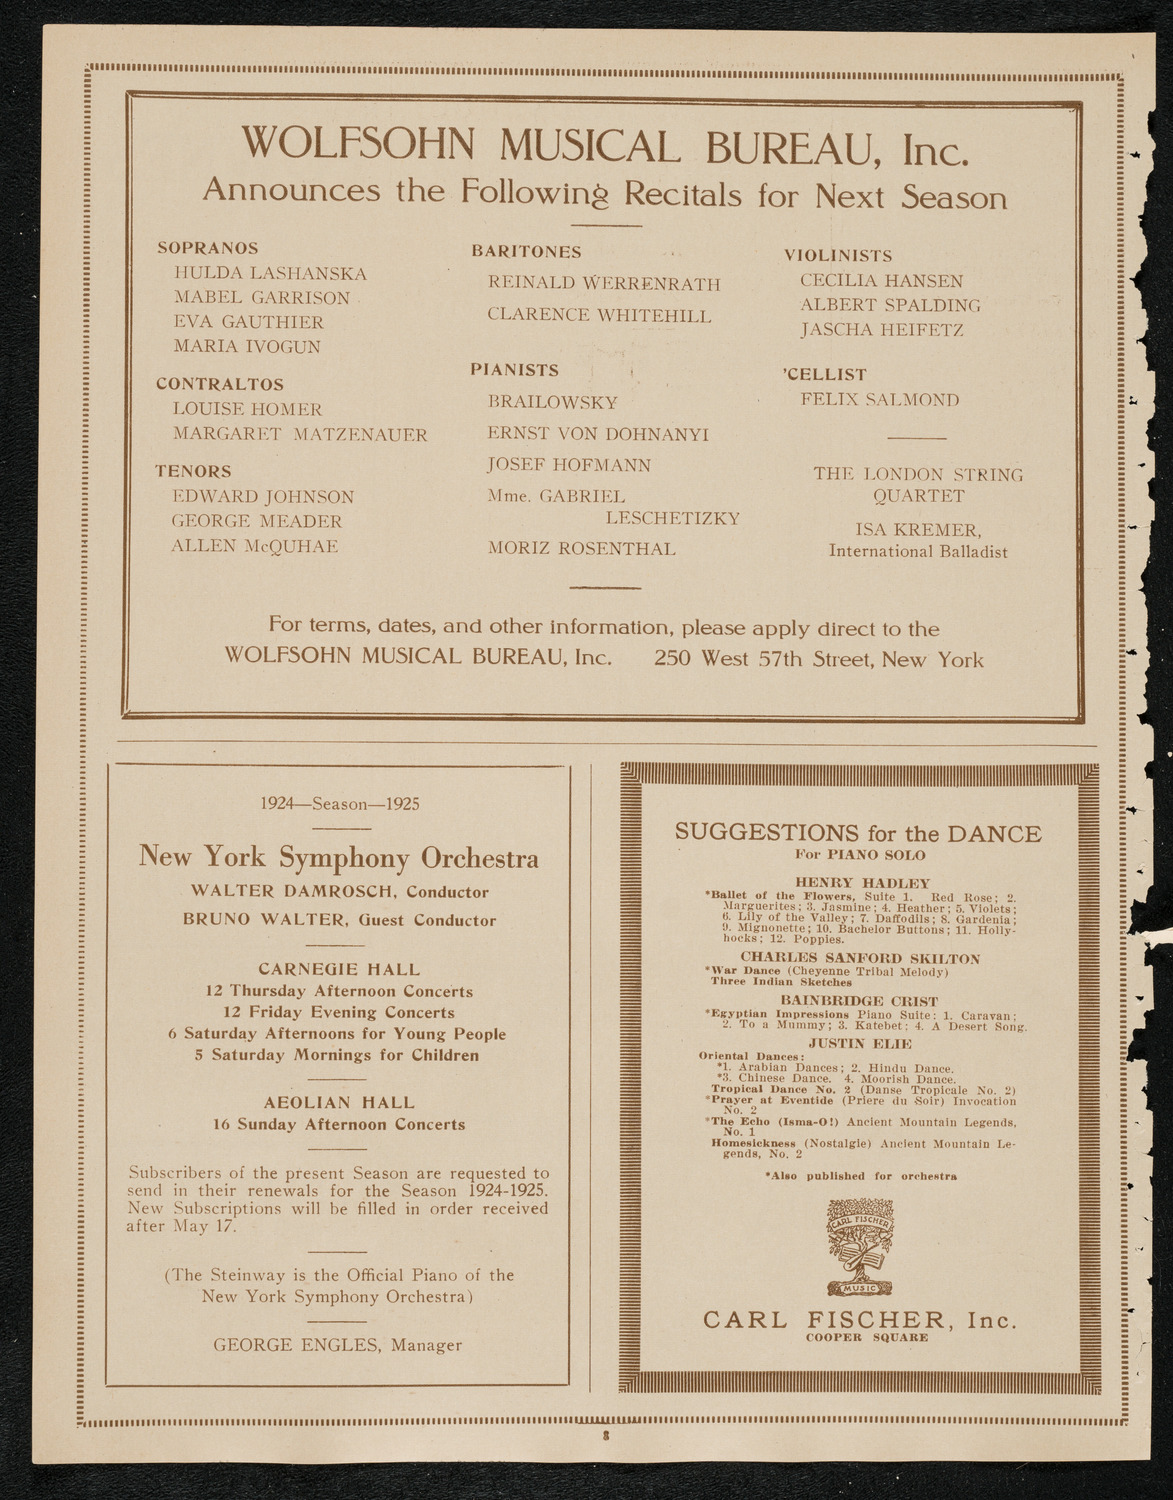 Benefit: Jewish Home for Convalescents, April 13, 1924, program page 8